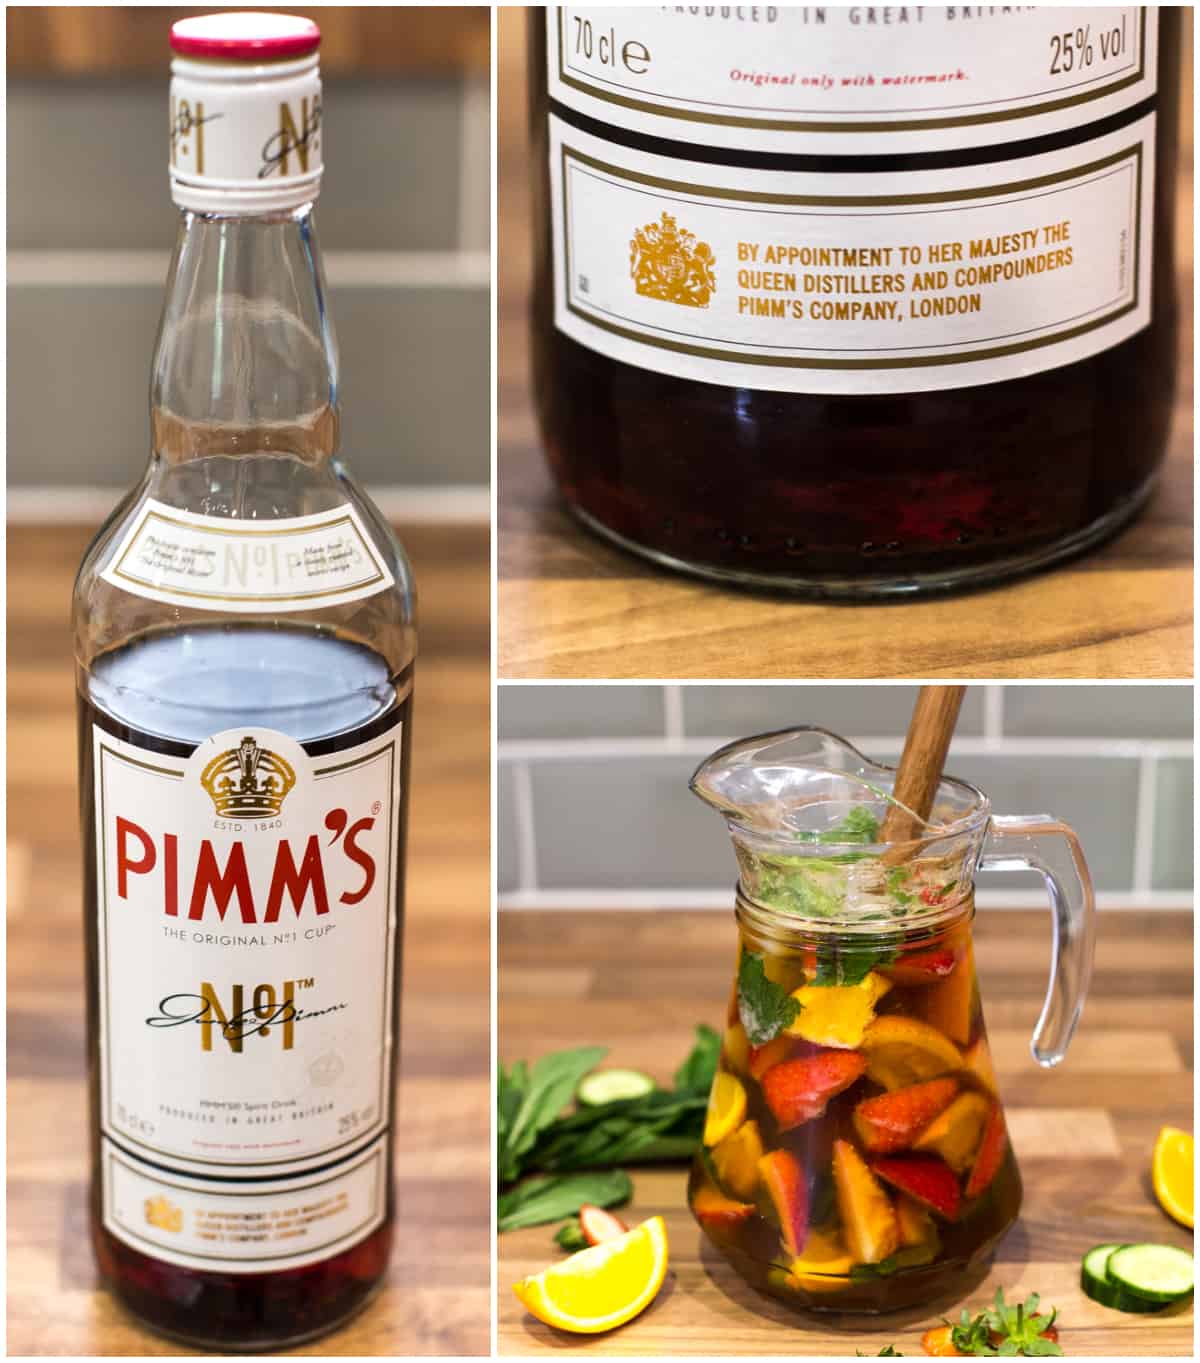 Collage showing a Pimm's bottle, the Queen's seal of approval, and a jug of Pimm's.